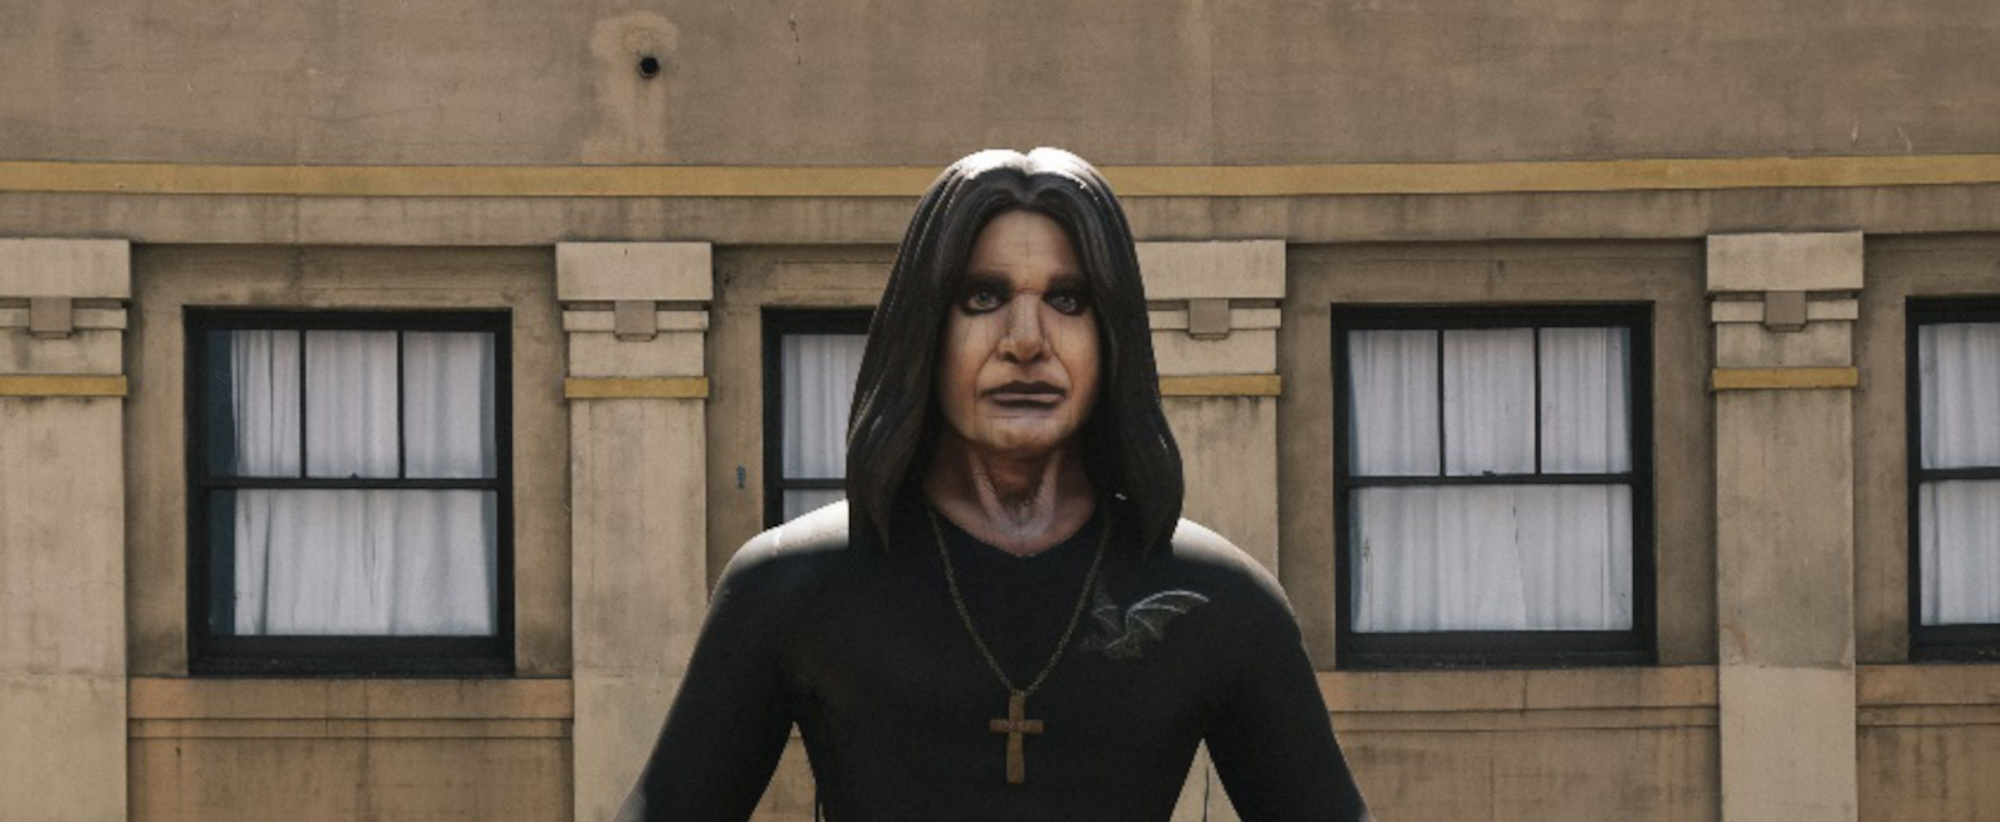 Watch Out! There May Be a 25-Foot Inflatable Ozzy Osbourne Right Behind You